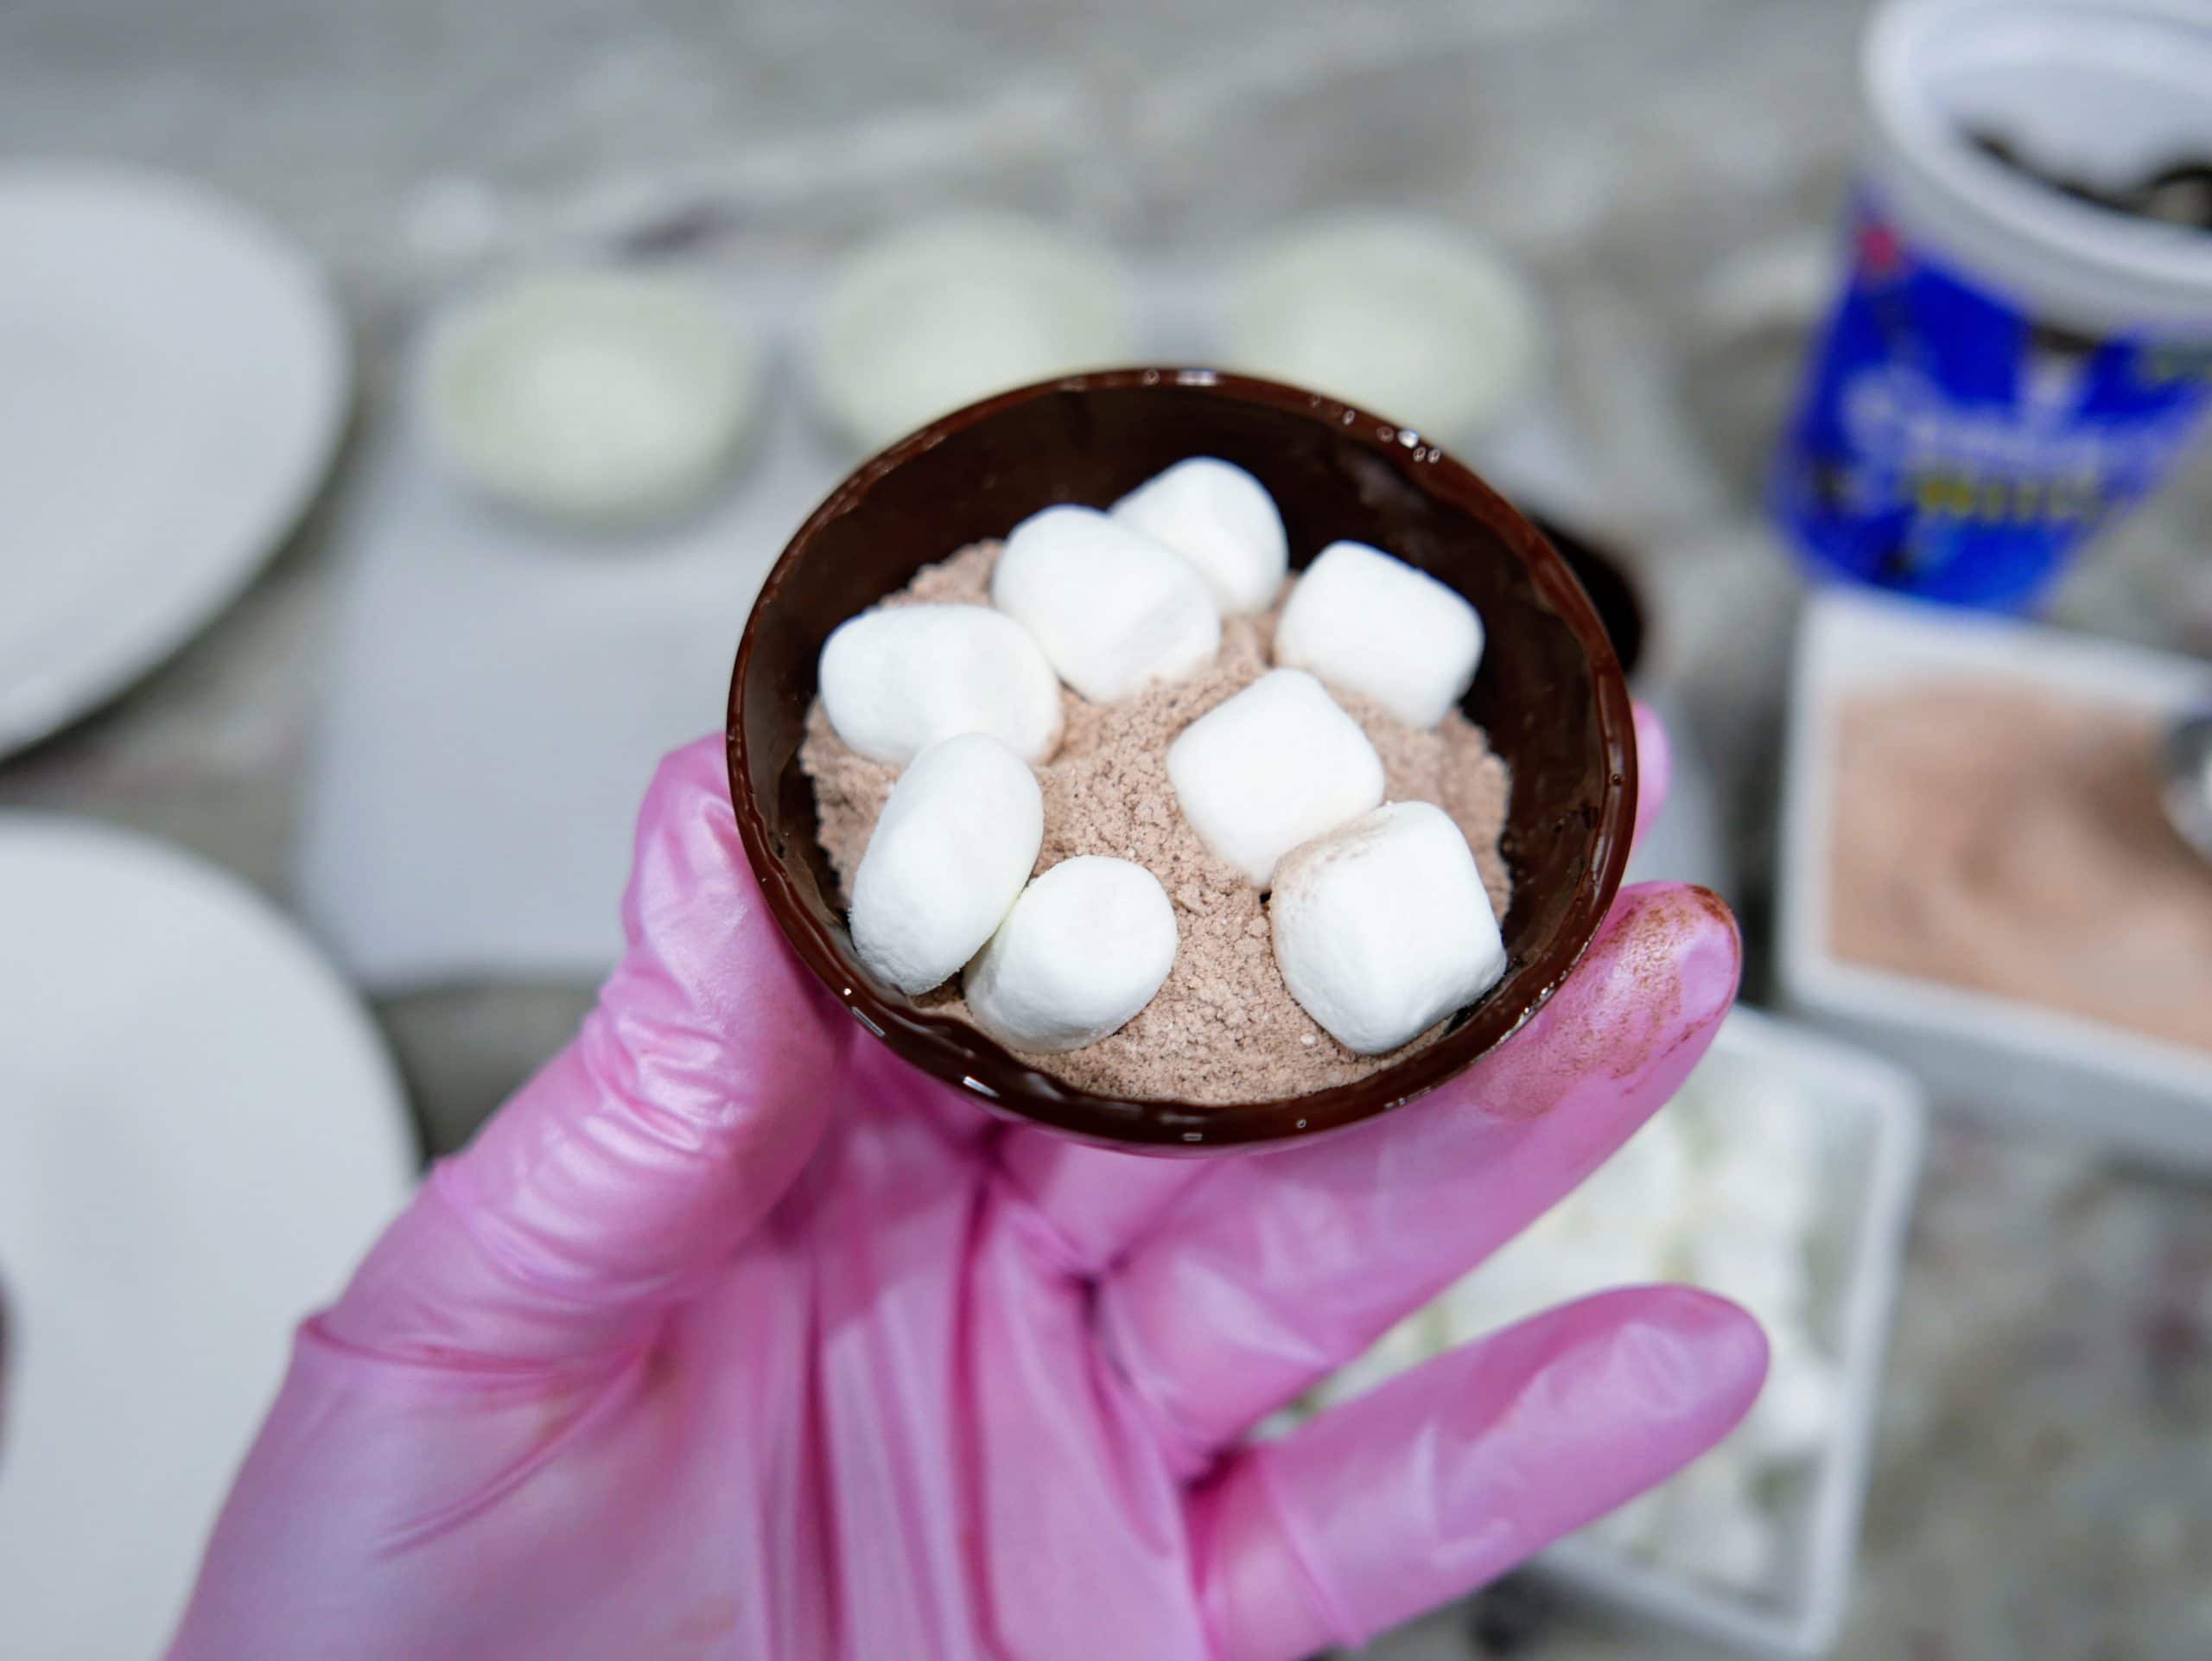 filling the inside chocolate shell with hot cocoa powder and marshmallows